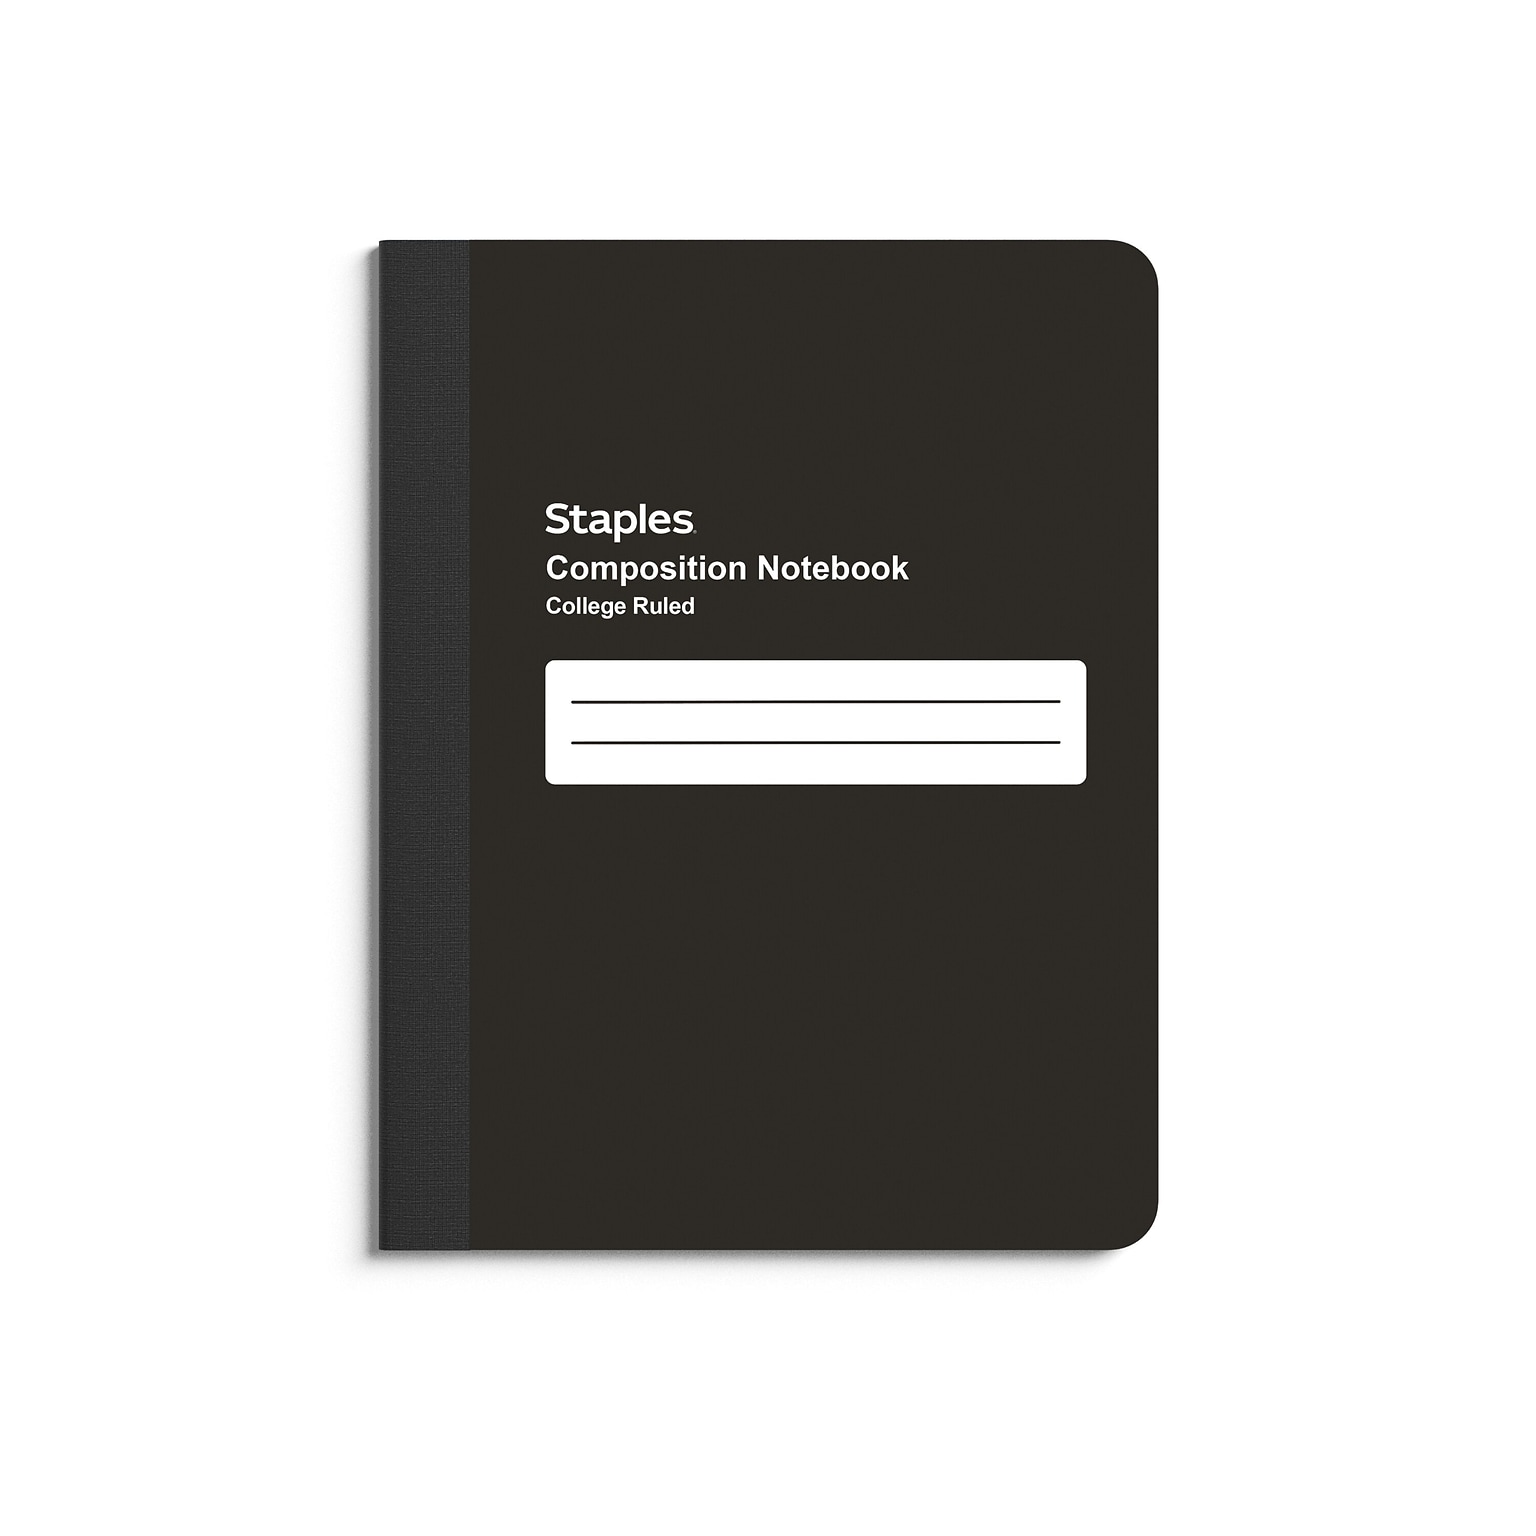 Staples Composition Notebook, 7.5 x 9.75, College Ruled, 80 Sheets, Black (ST55083)